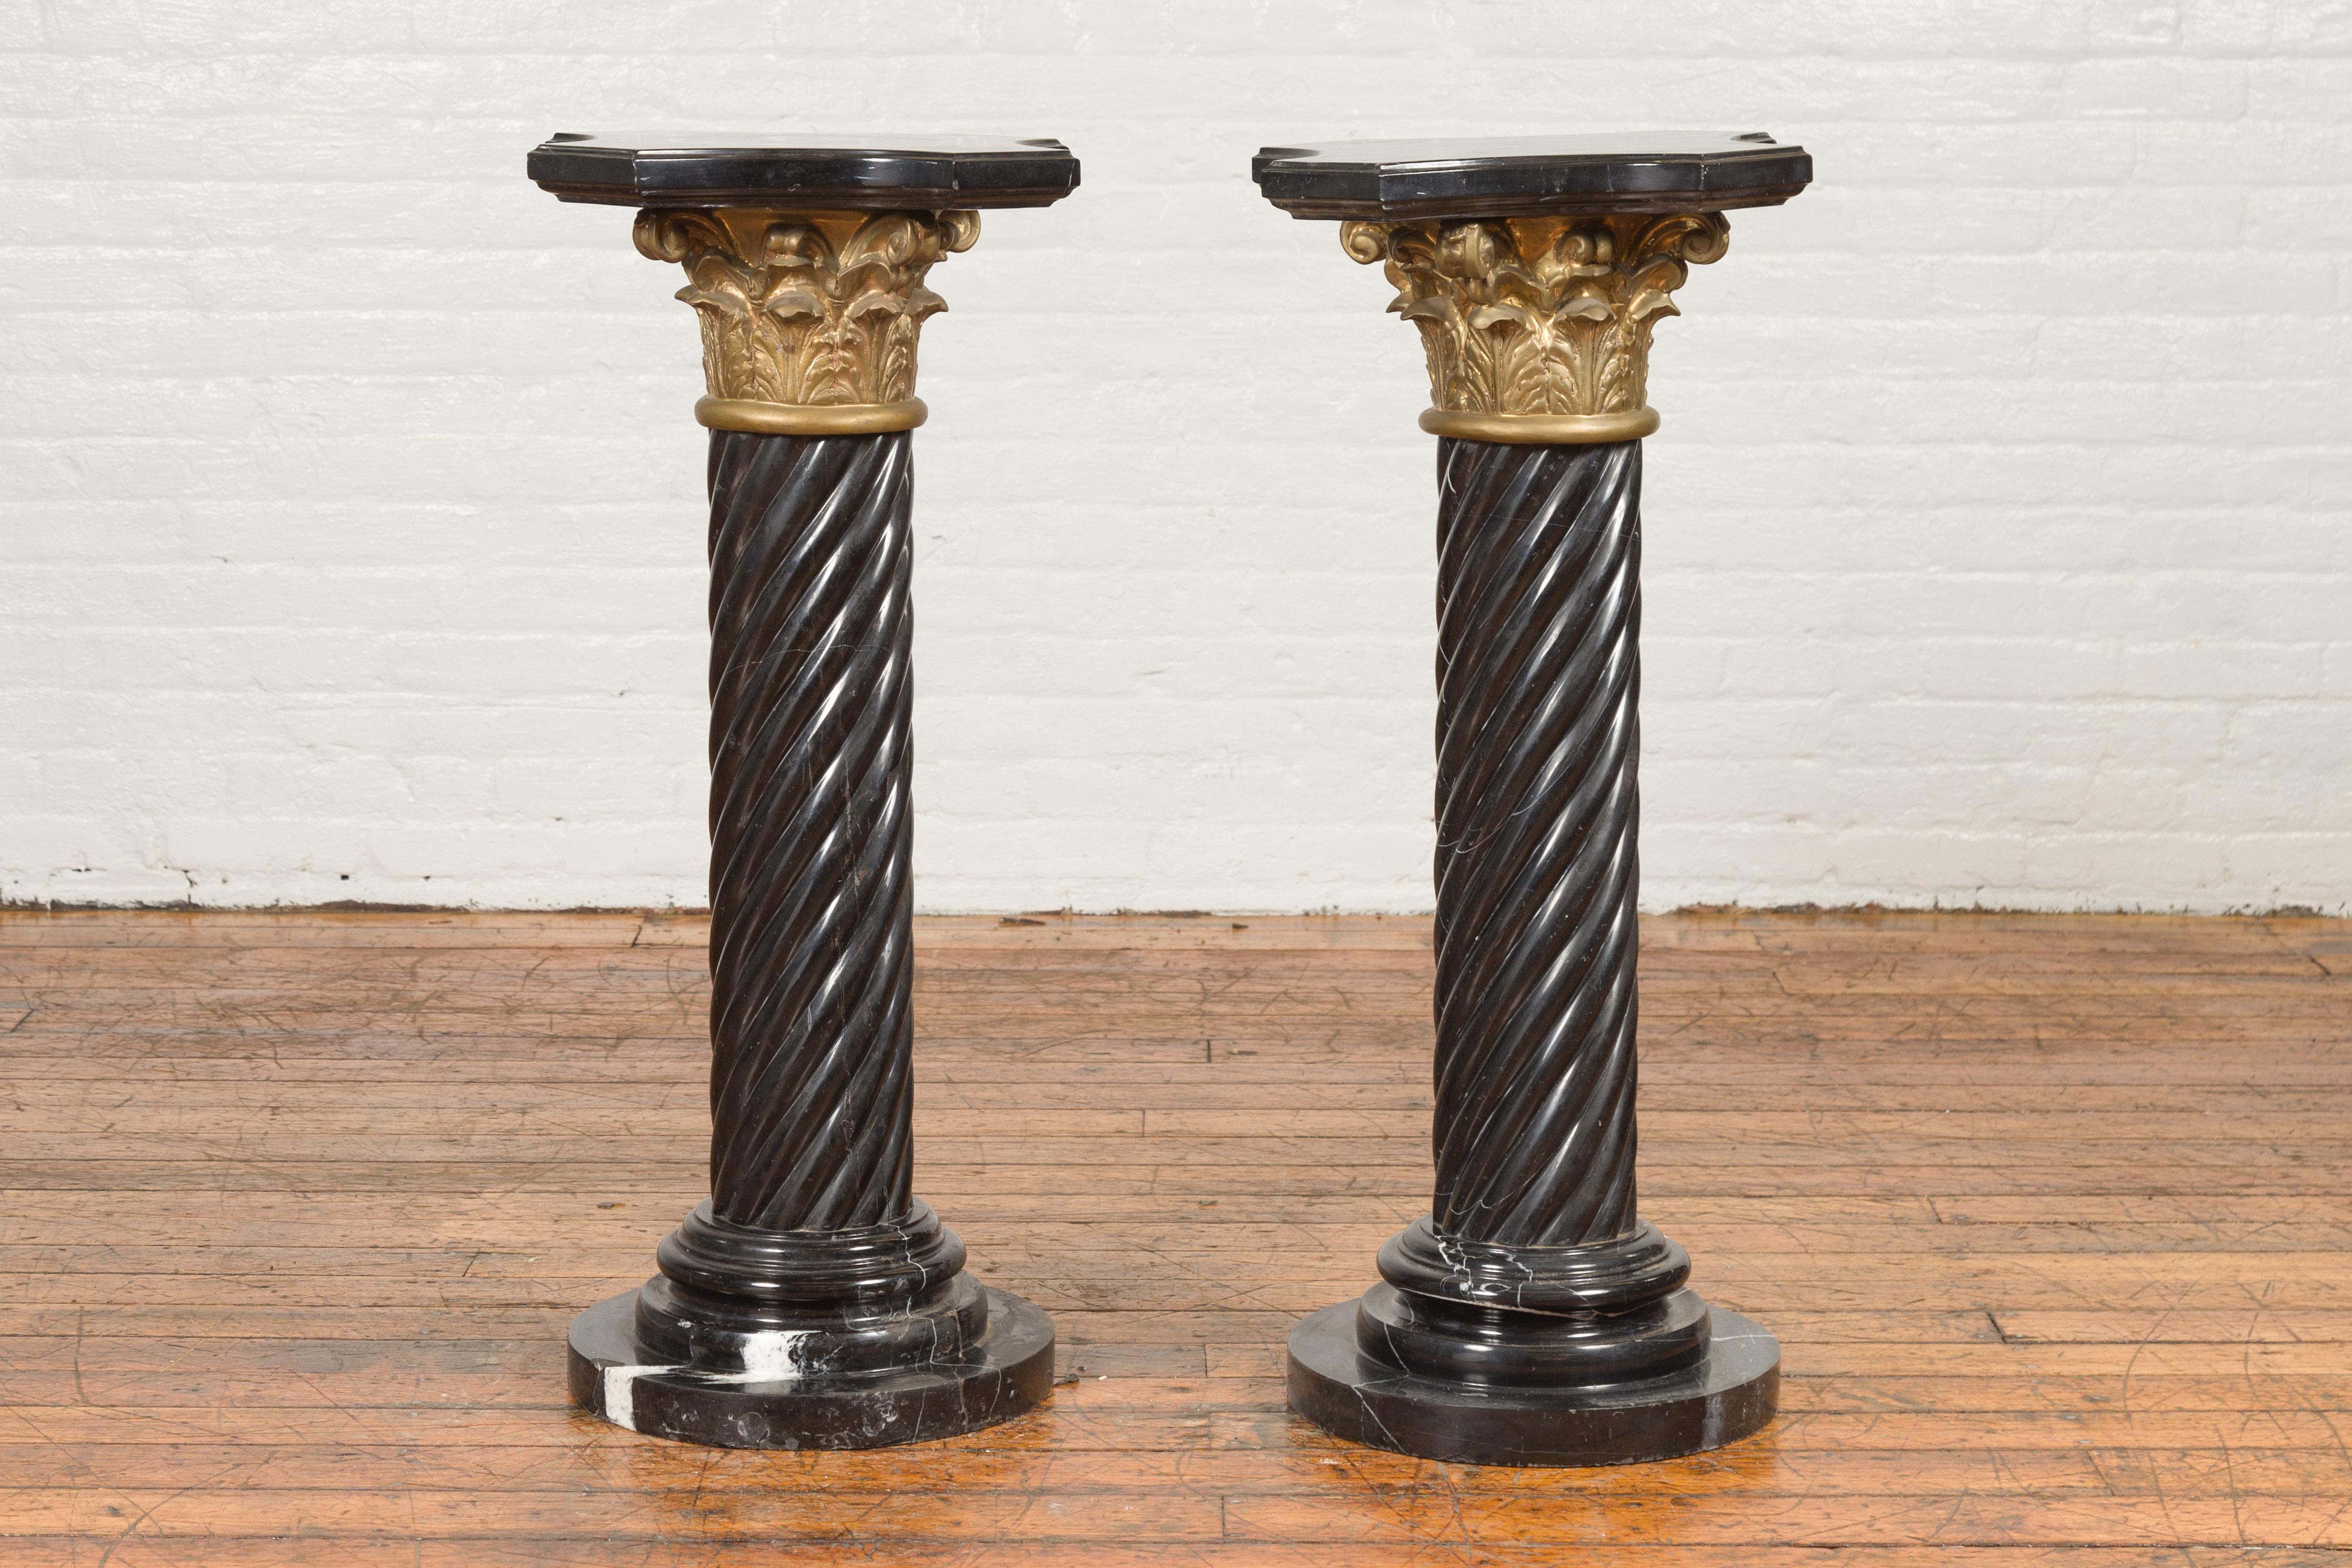 A pair of vintage Thai black Carrara marble pedestals with bronze Corinthian capitals and twisted columns. Created during the midcentury period, each of this pair of pedestals features a shaped marble top with in-curving effects, sitting above a